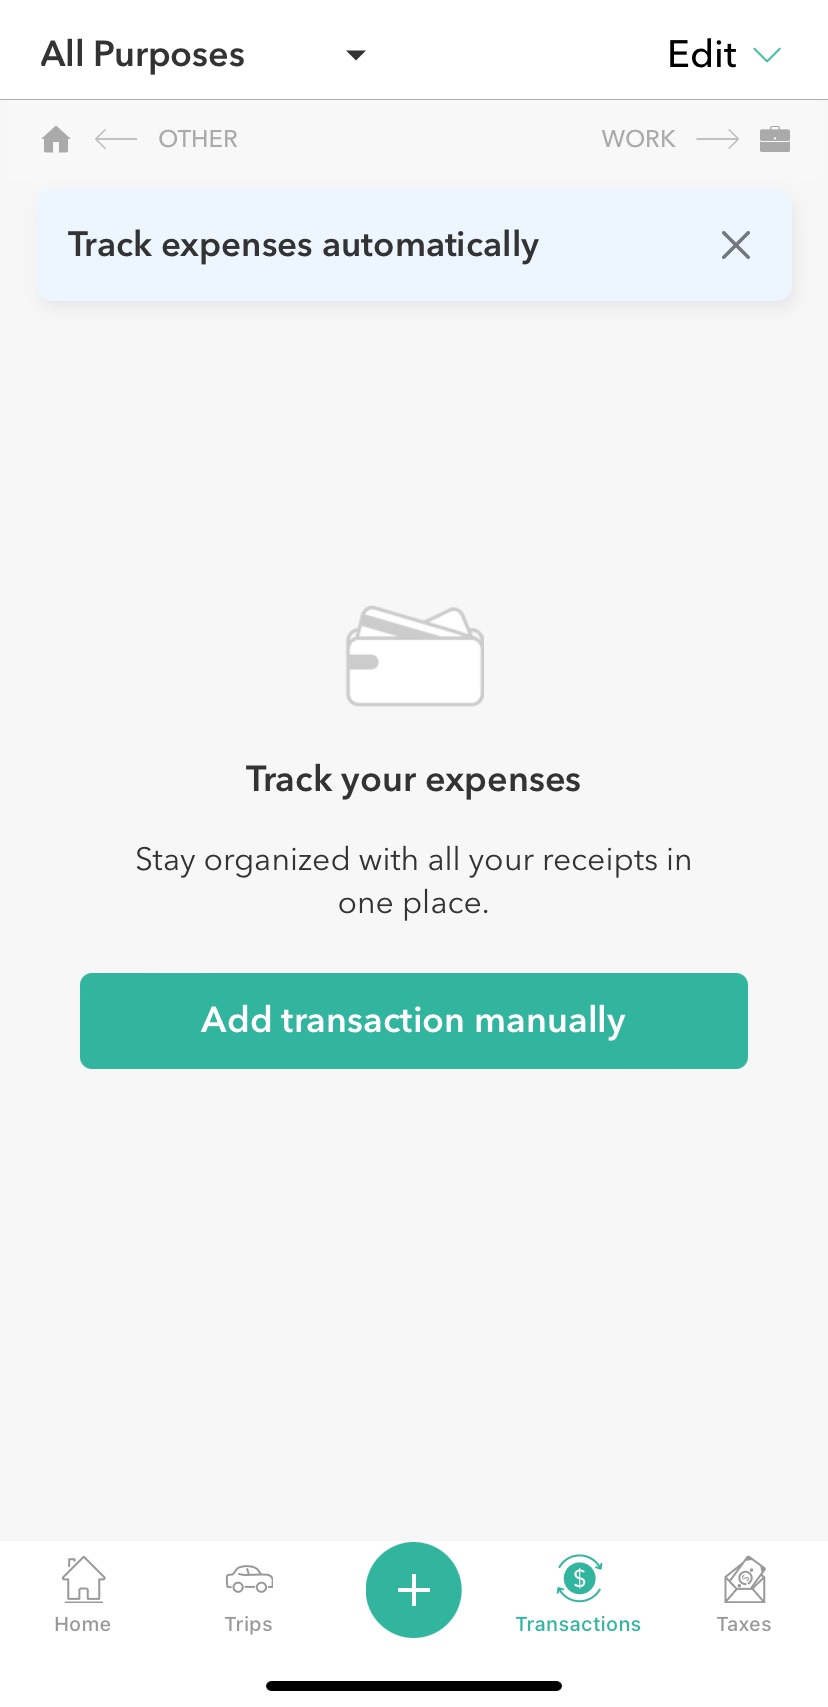 everlance app allows users to track their expenses